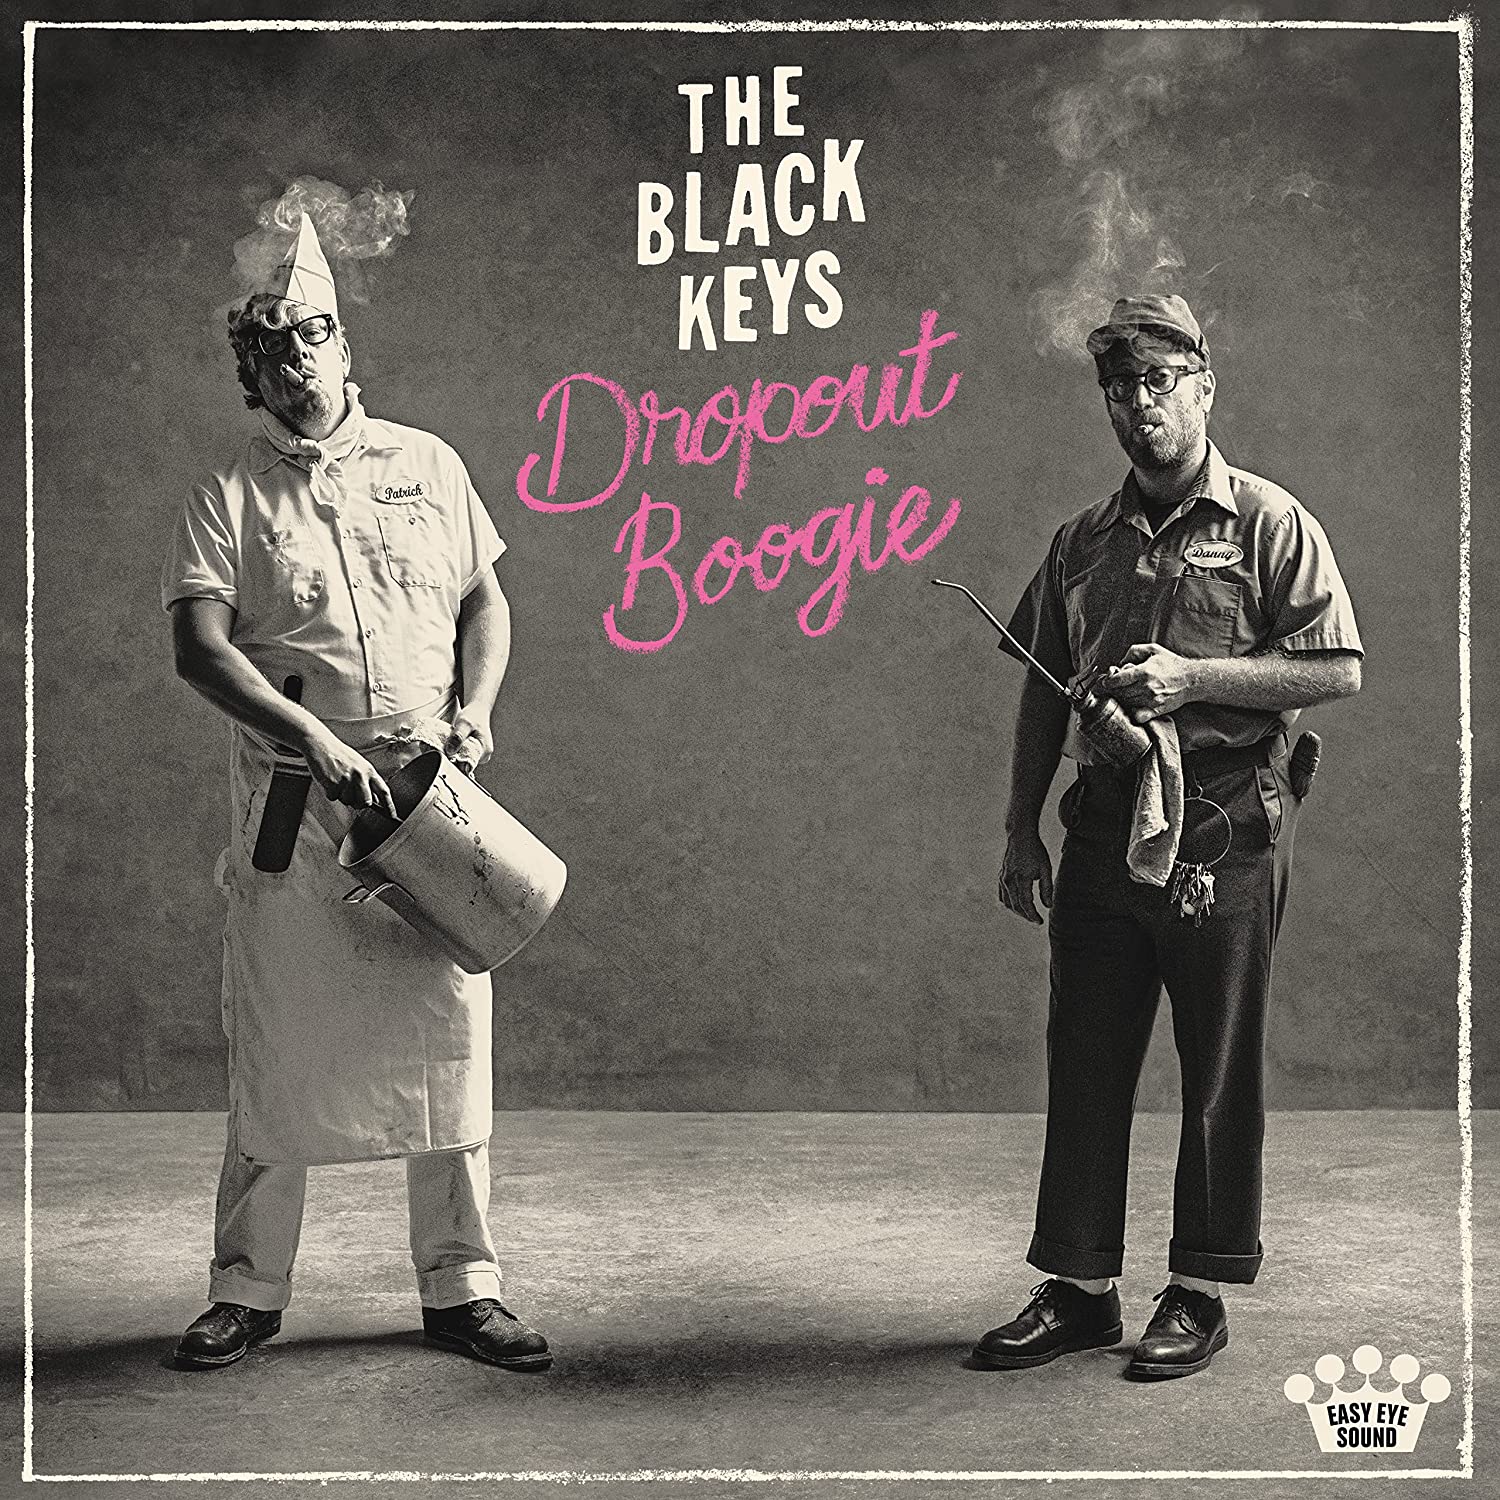 The Black Keys – The Dropout Boogie